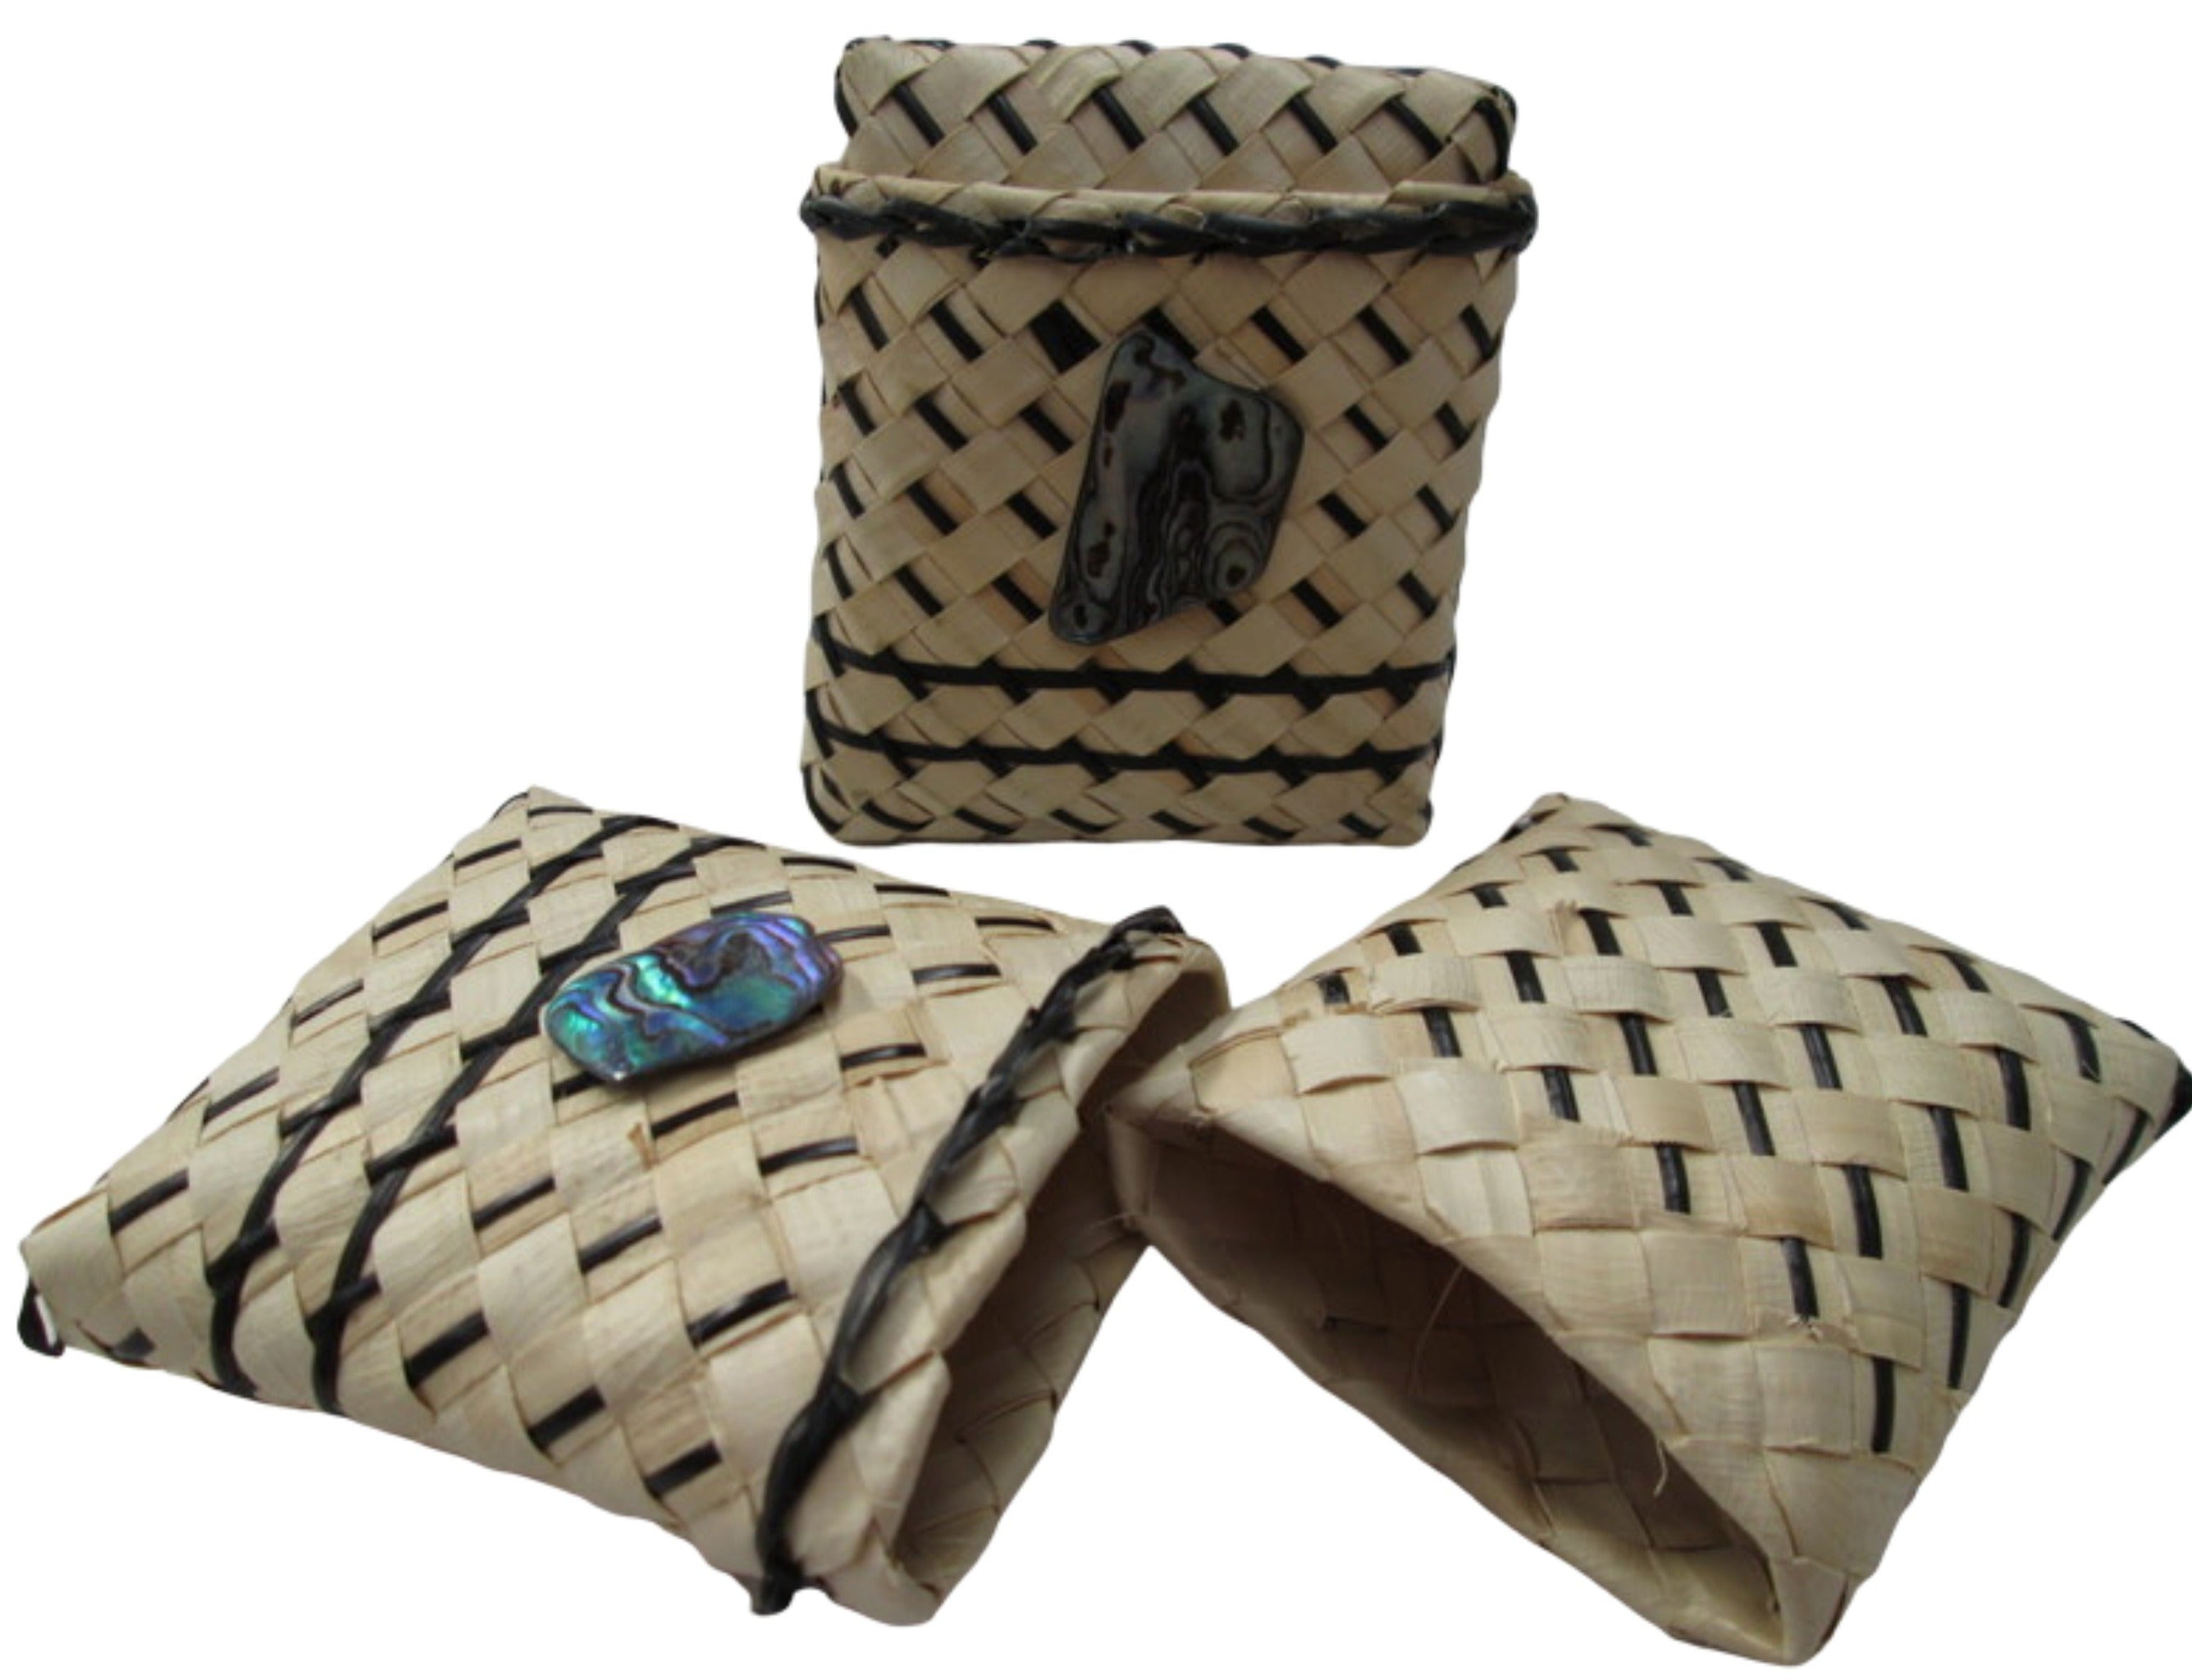 Kete Pouch with Paua